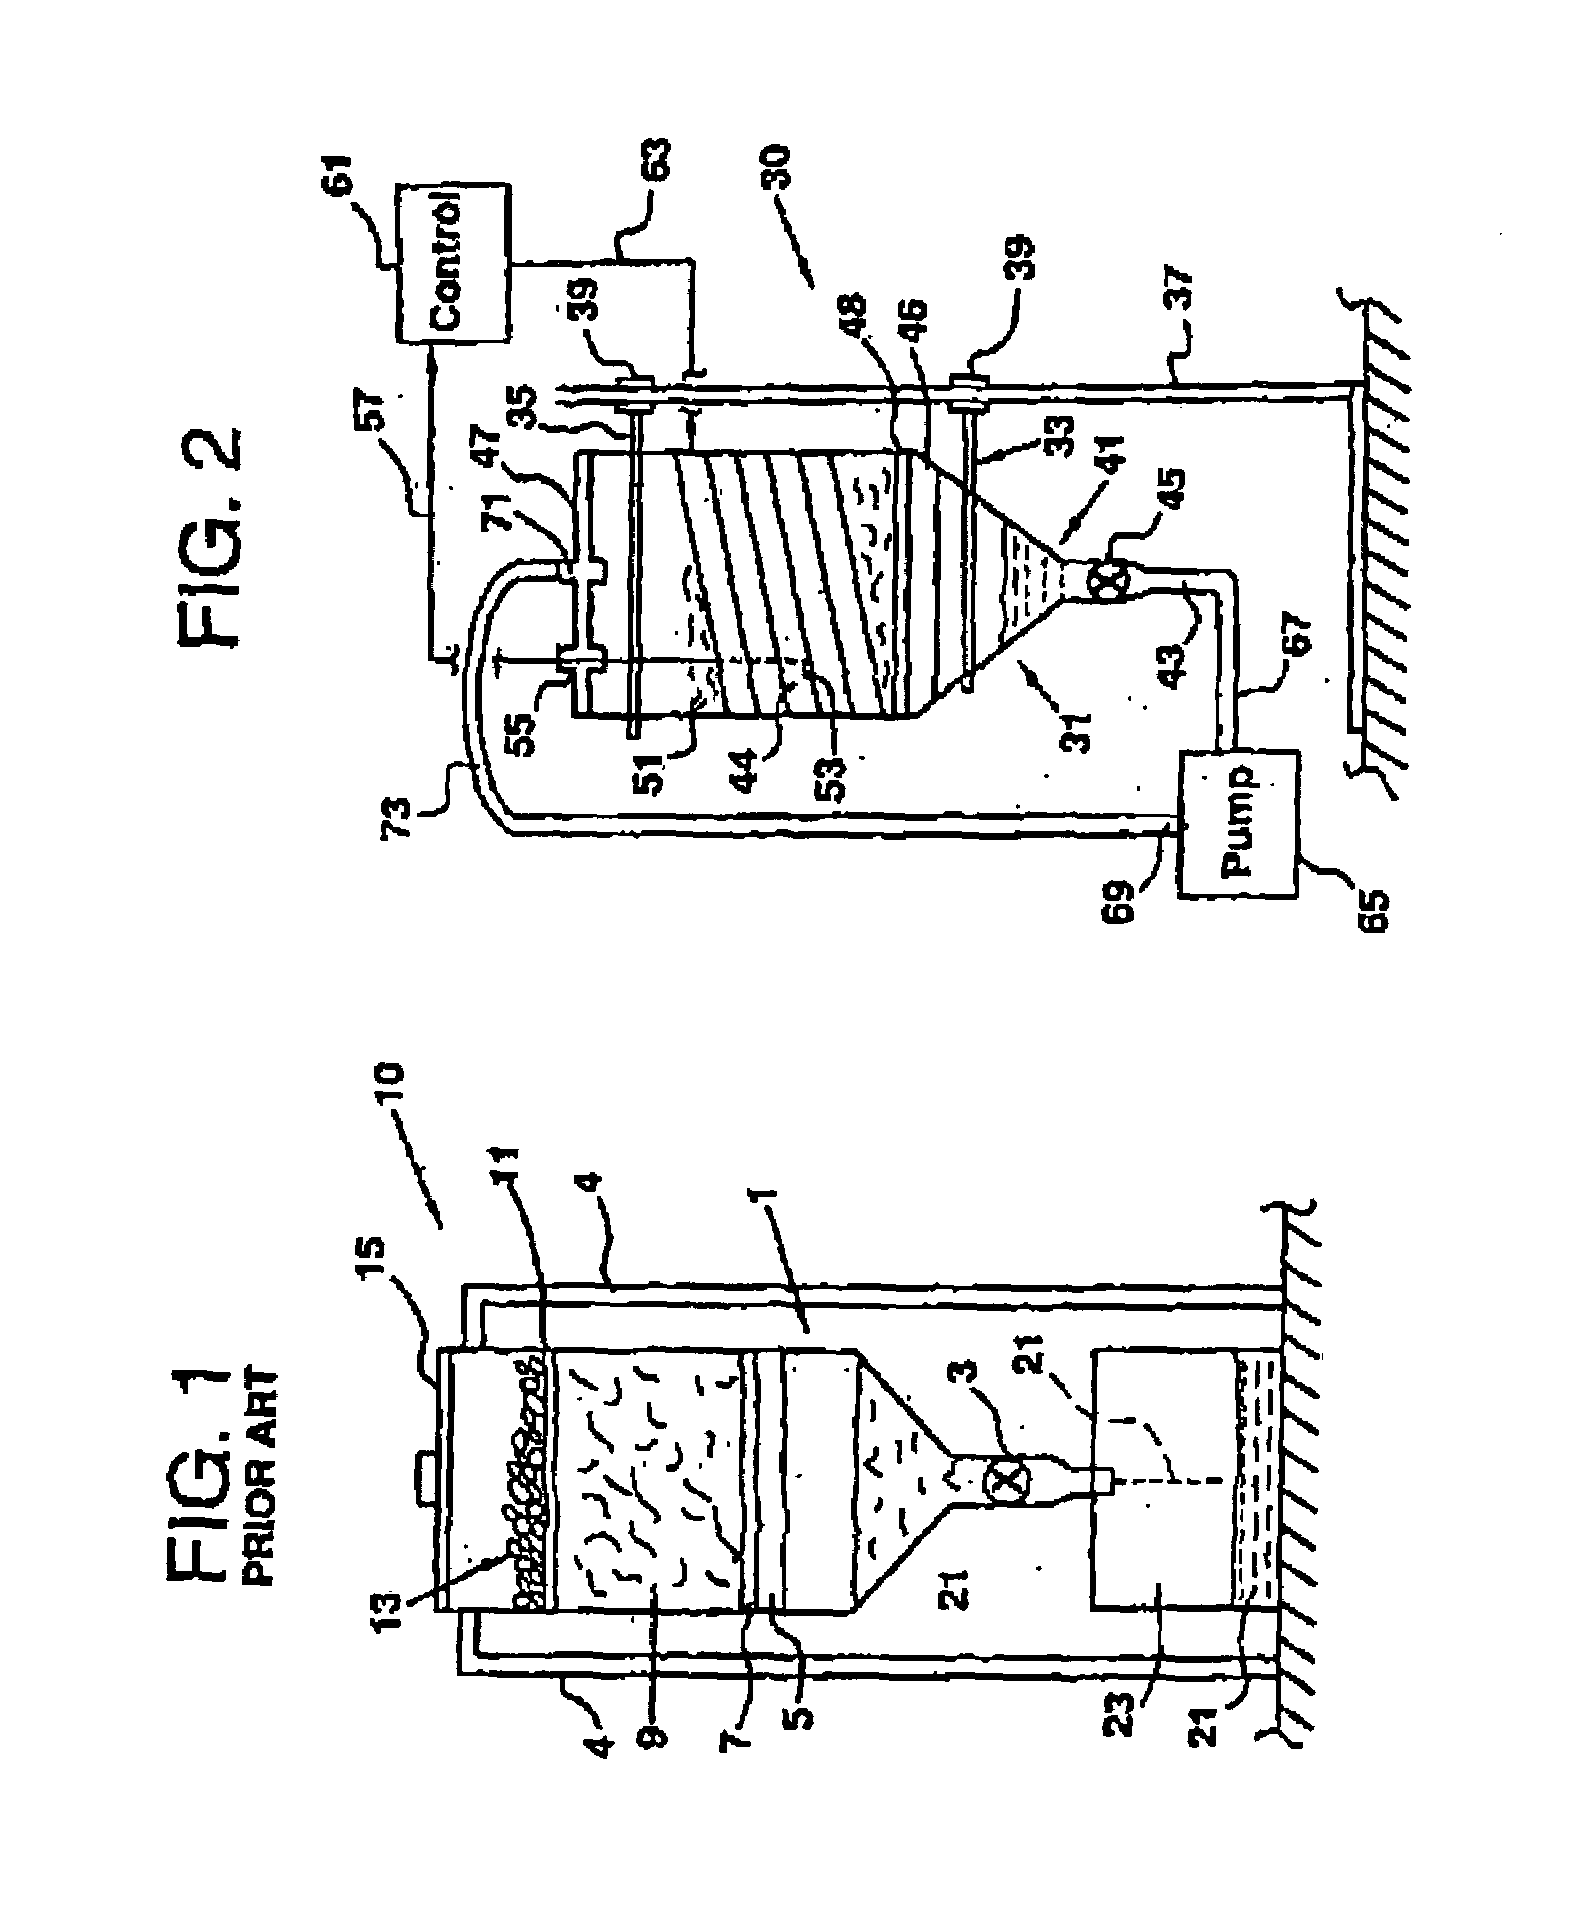 Method for making herbal extracts using percolation